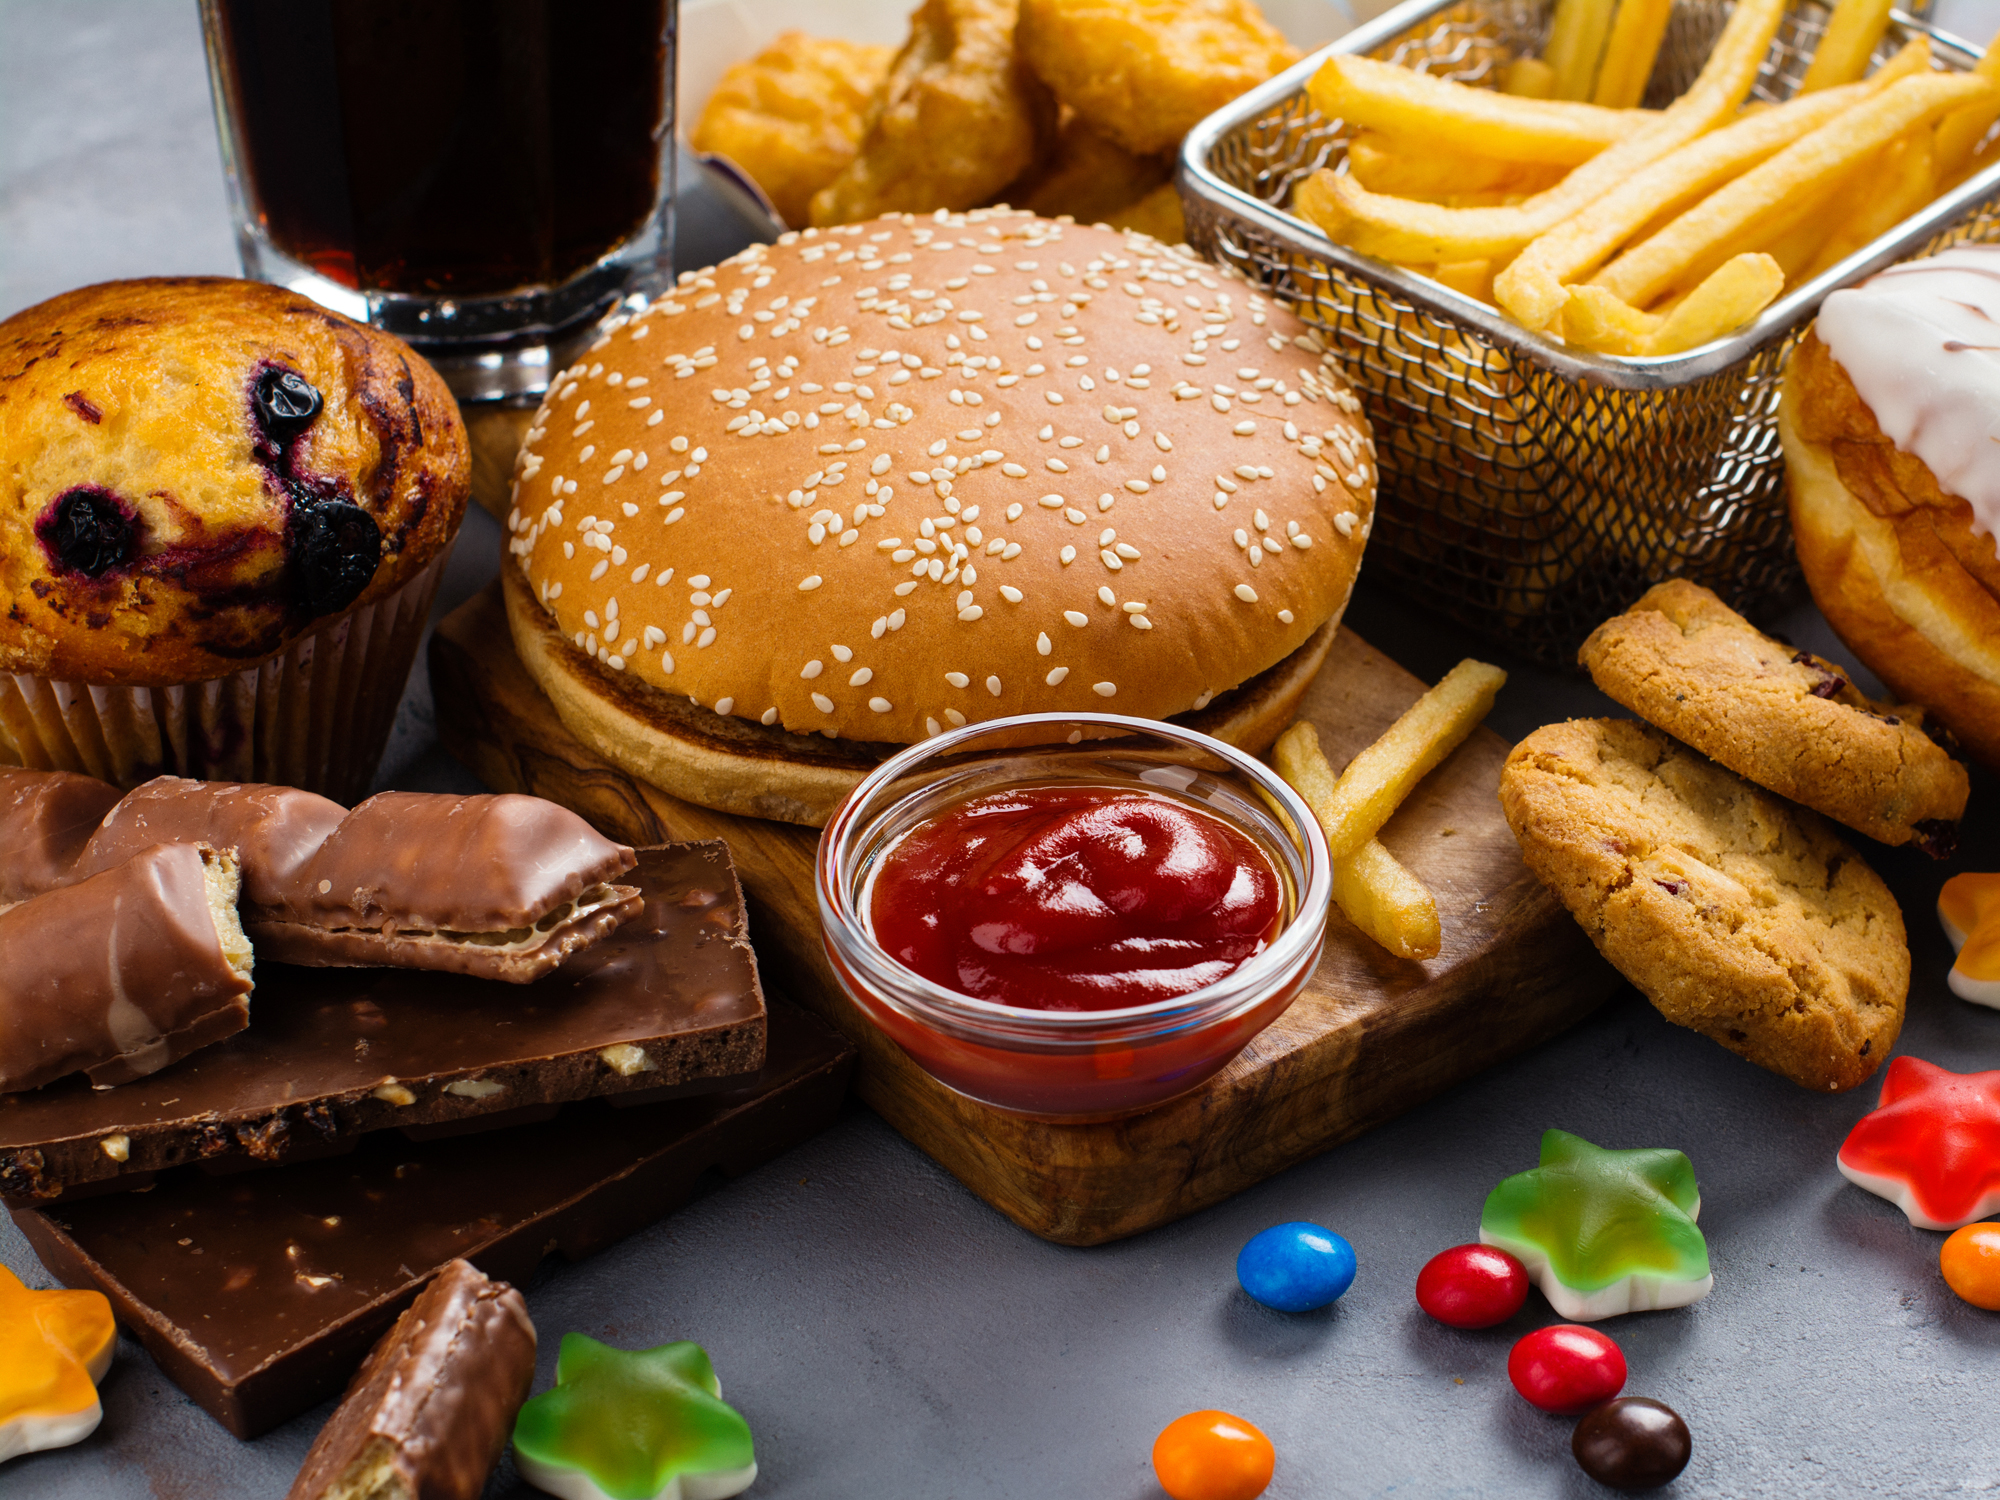 34 health problems fueled by junk food